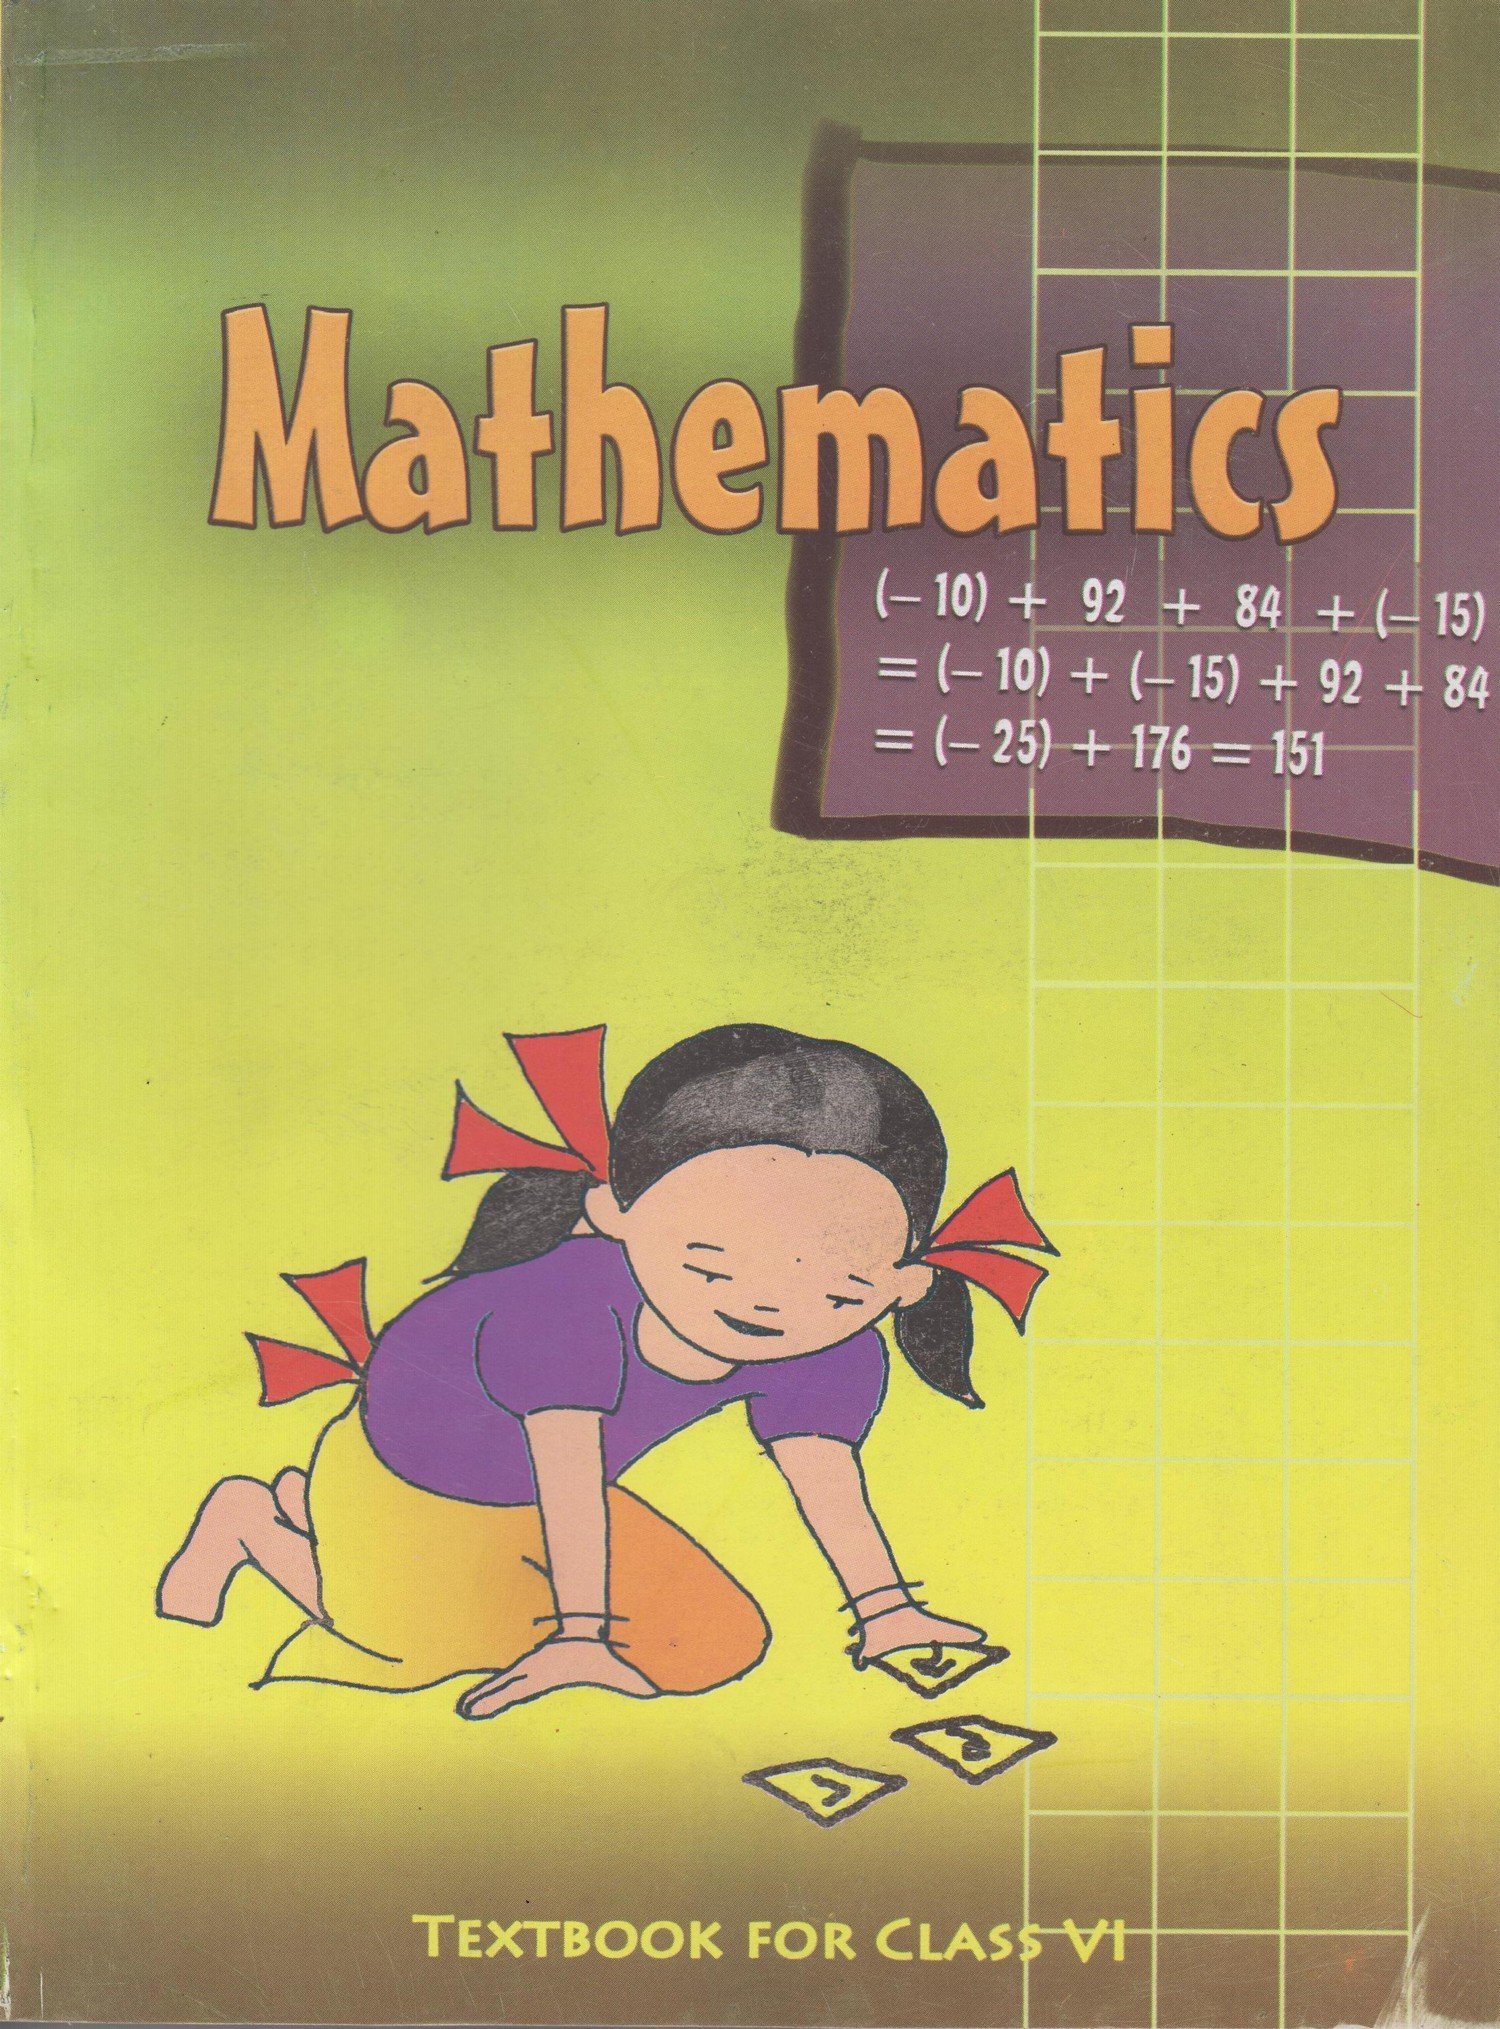 Routemybook  Buy 6th CBSE Mathematics Textbook by NCERT Editorial